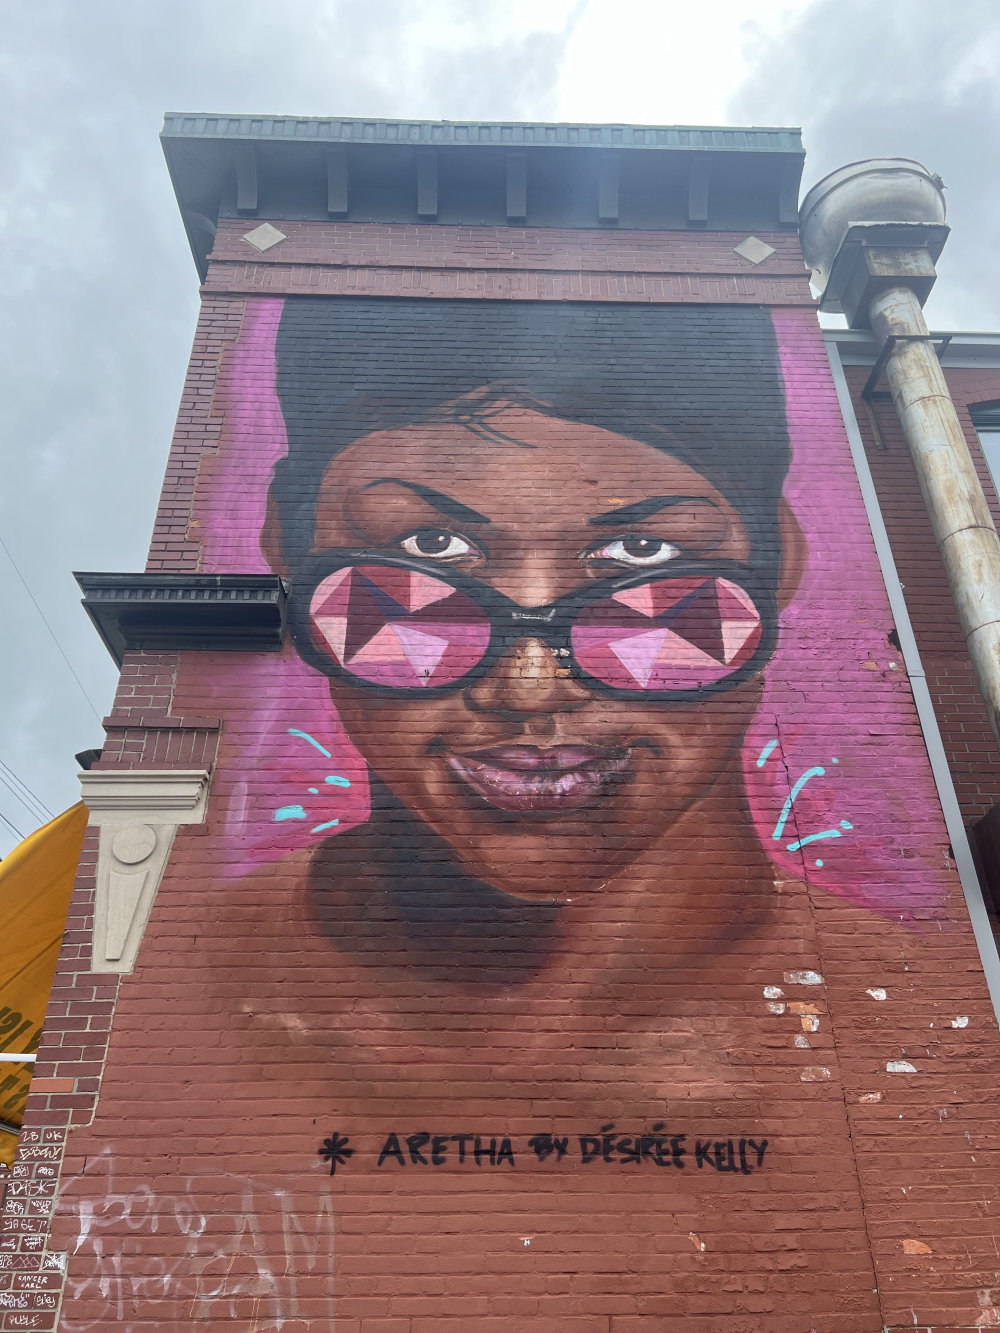 mural in Detroit by artist Desiree Kelly. Tagged: Aretha Franklin